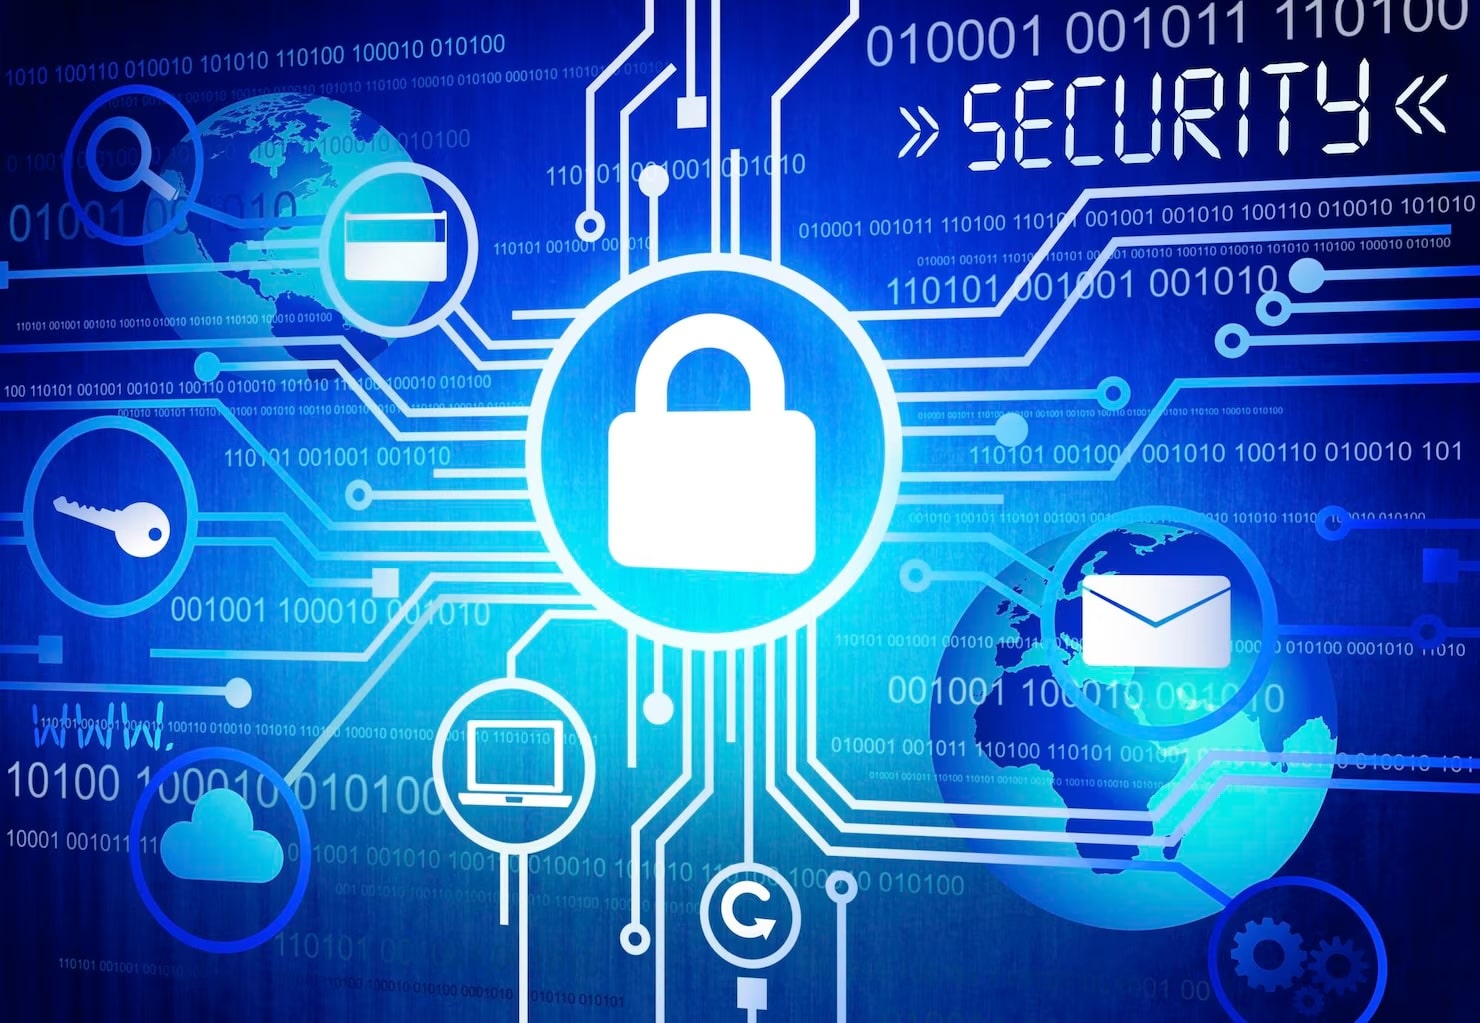 Why Comply with PCI Security Standards